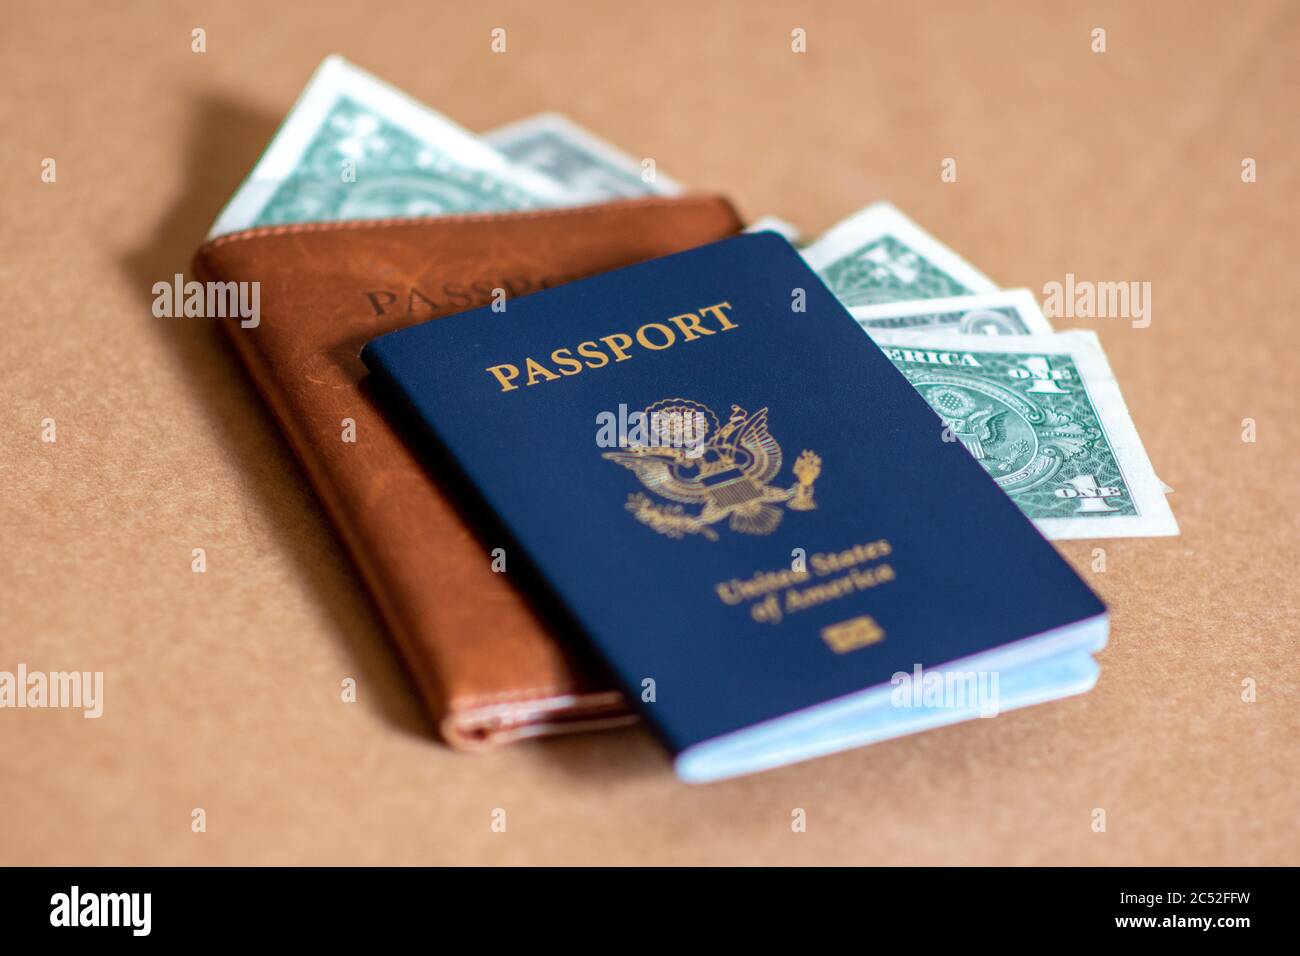 Concept photo of American tourists spending US Dollars and through travel after coronavirus. American passport, leather passport cover, and bank notes. Stock Photo